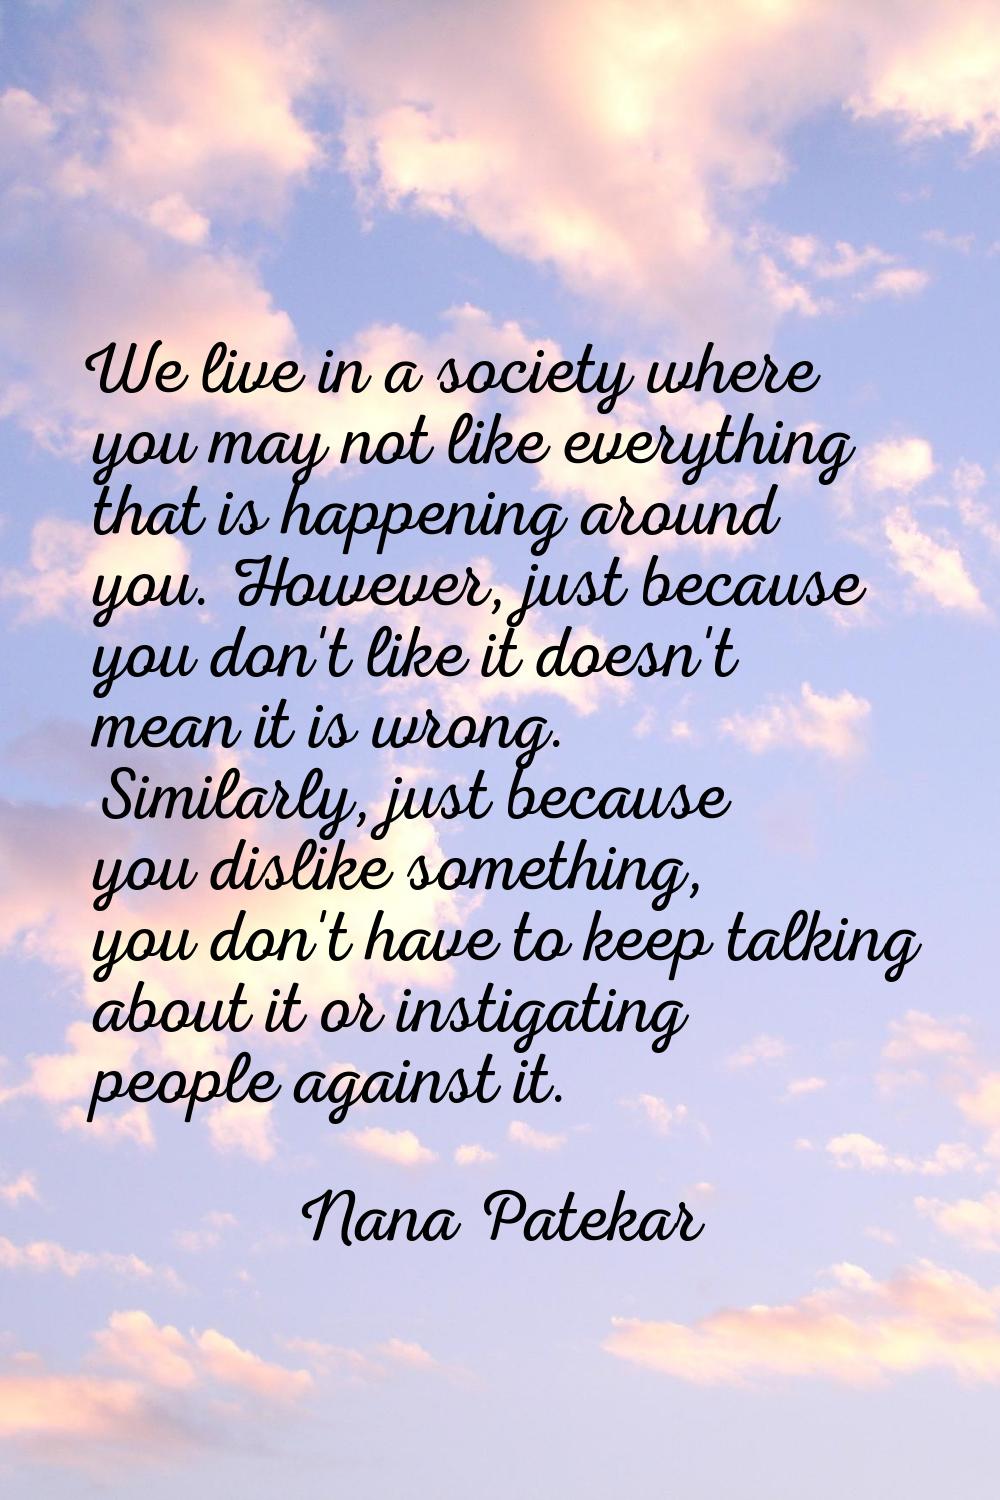 We live in a society where you may not like everything that is happening around you. However, just 